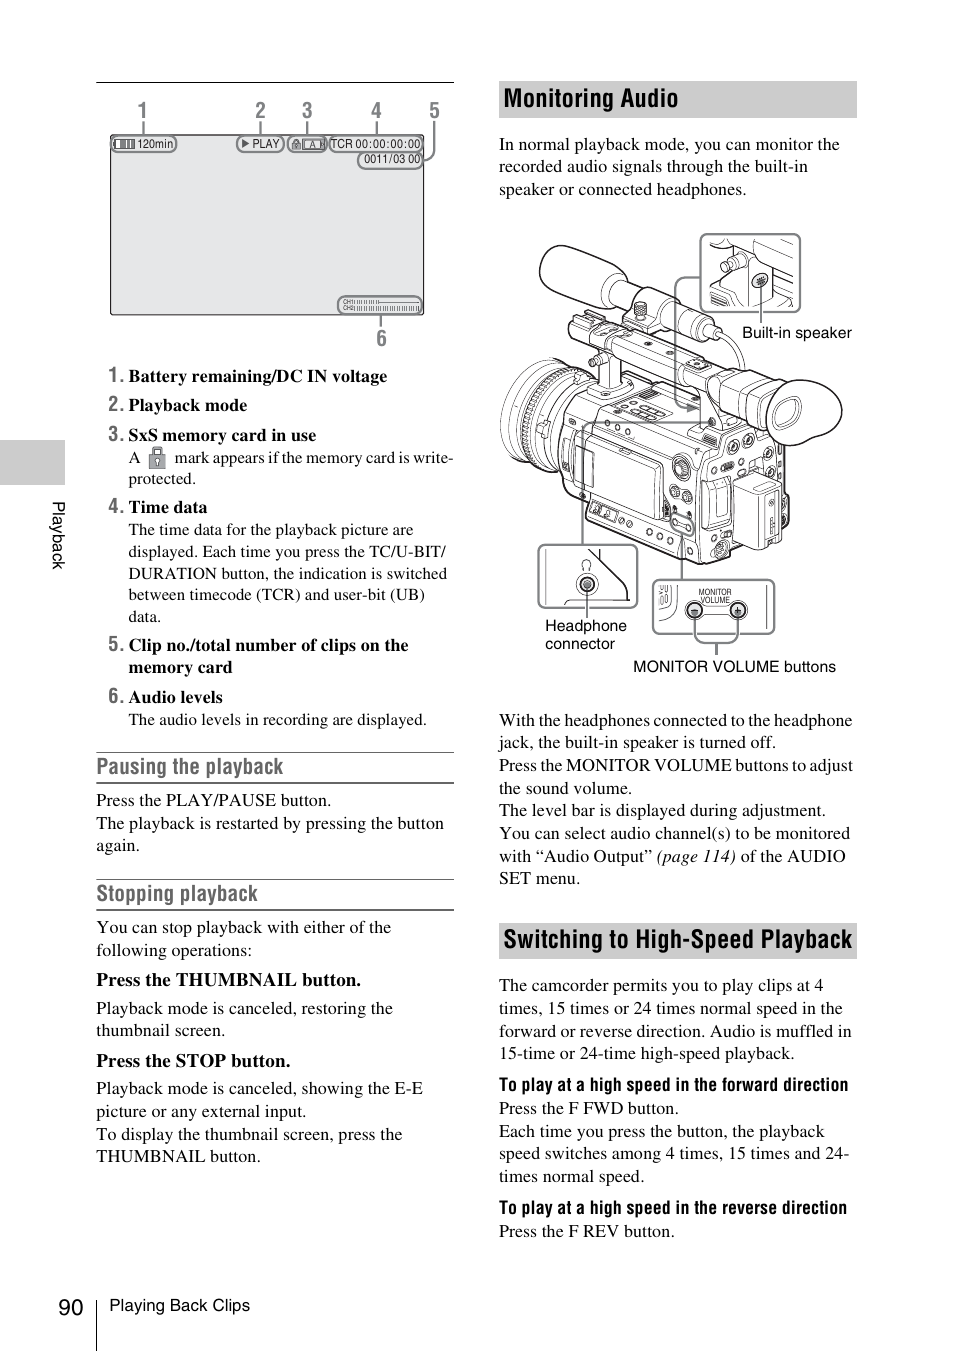 Monitoring audio, Switching to high-speed playback, Monitoring audio switching to high-speed playback | Pausing the playback, Stopping playback | Sony PMW-F3K User Manual | Page 90 / 164